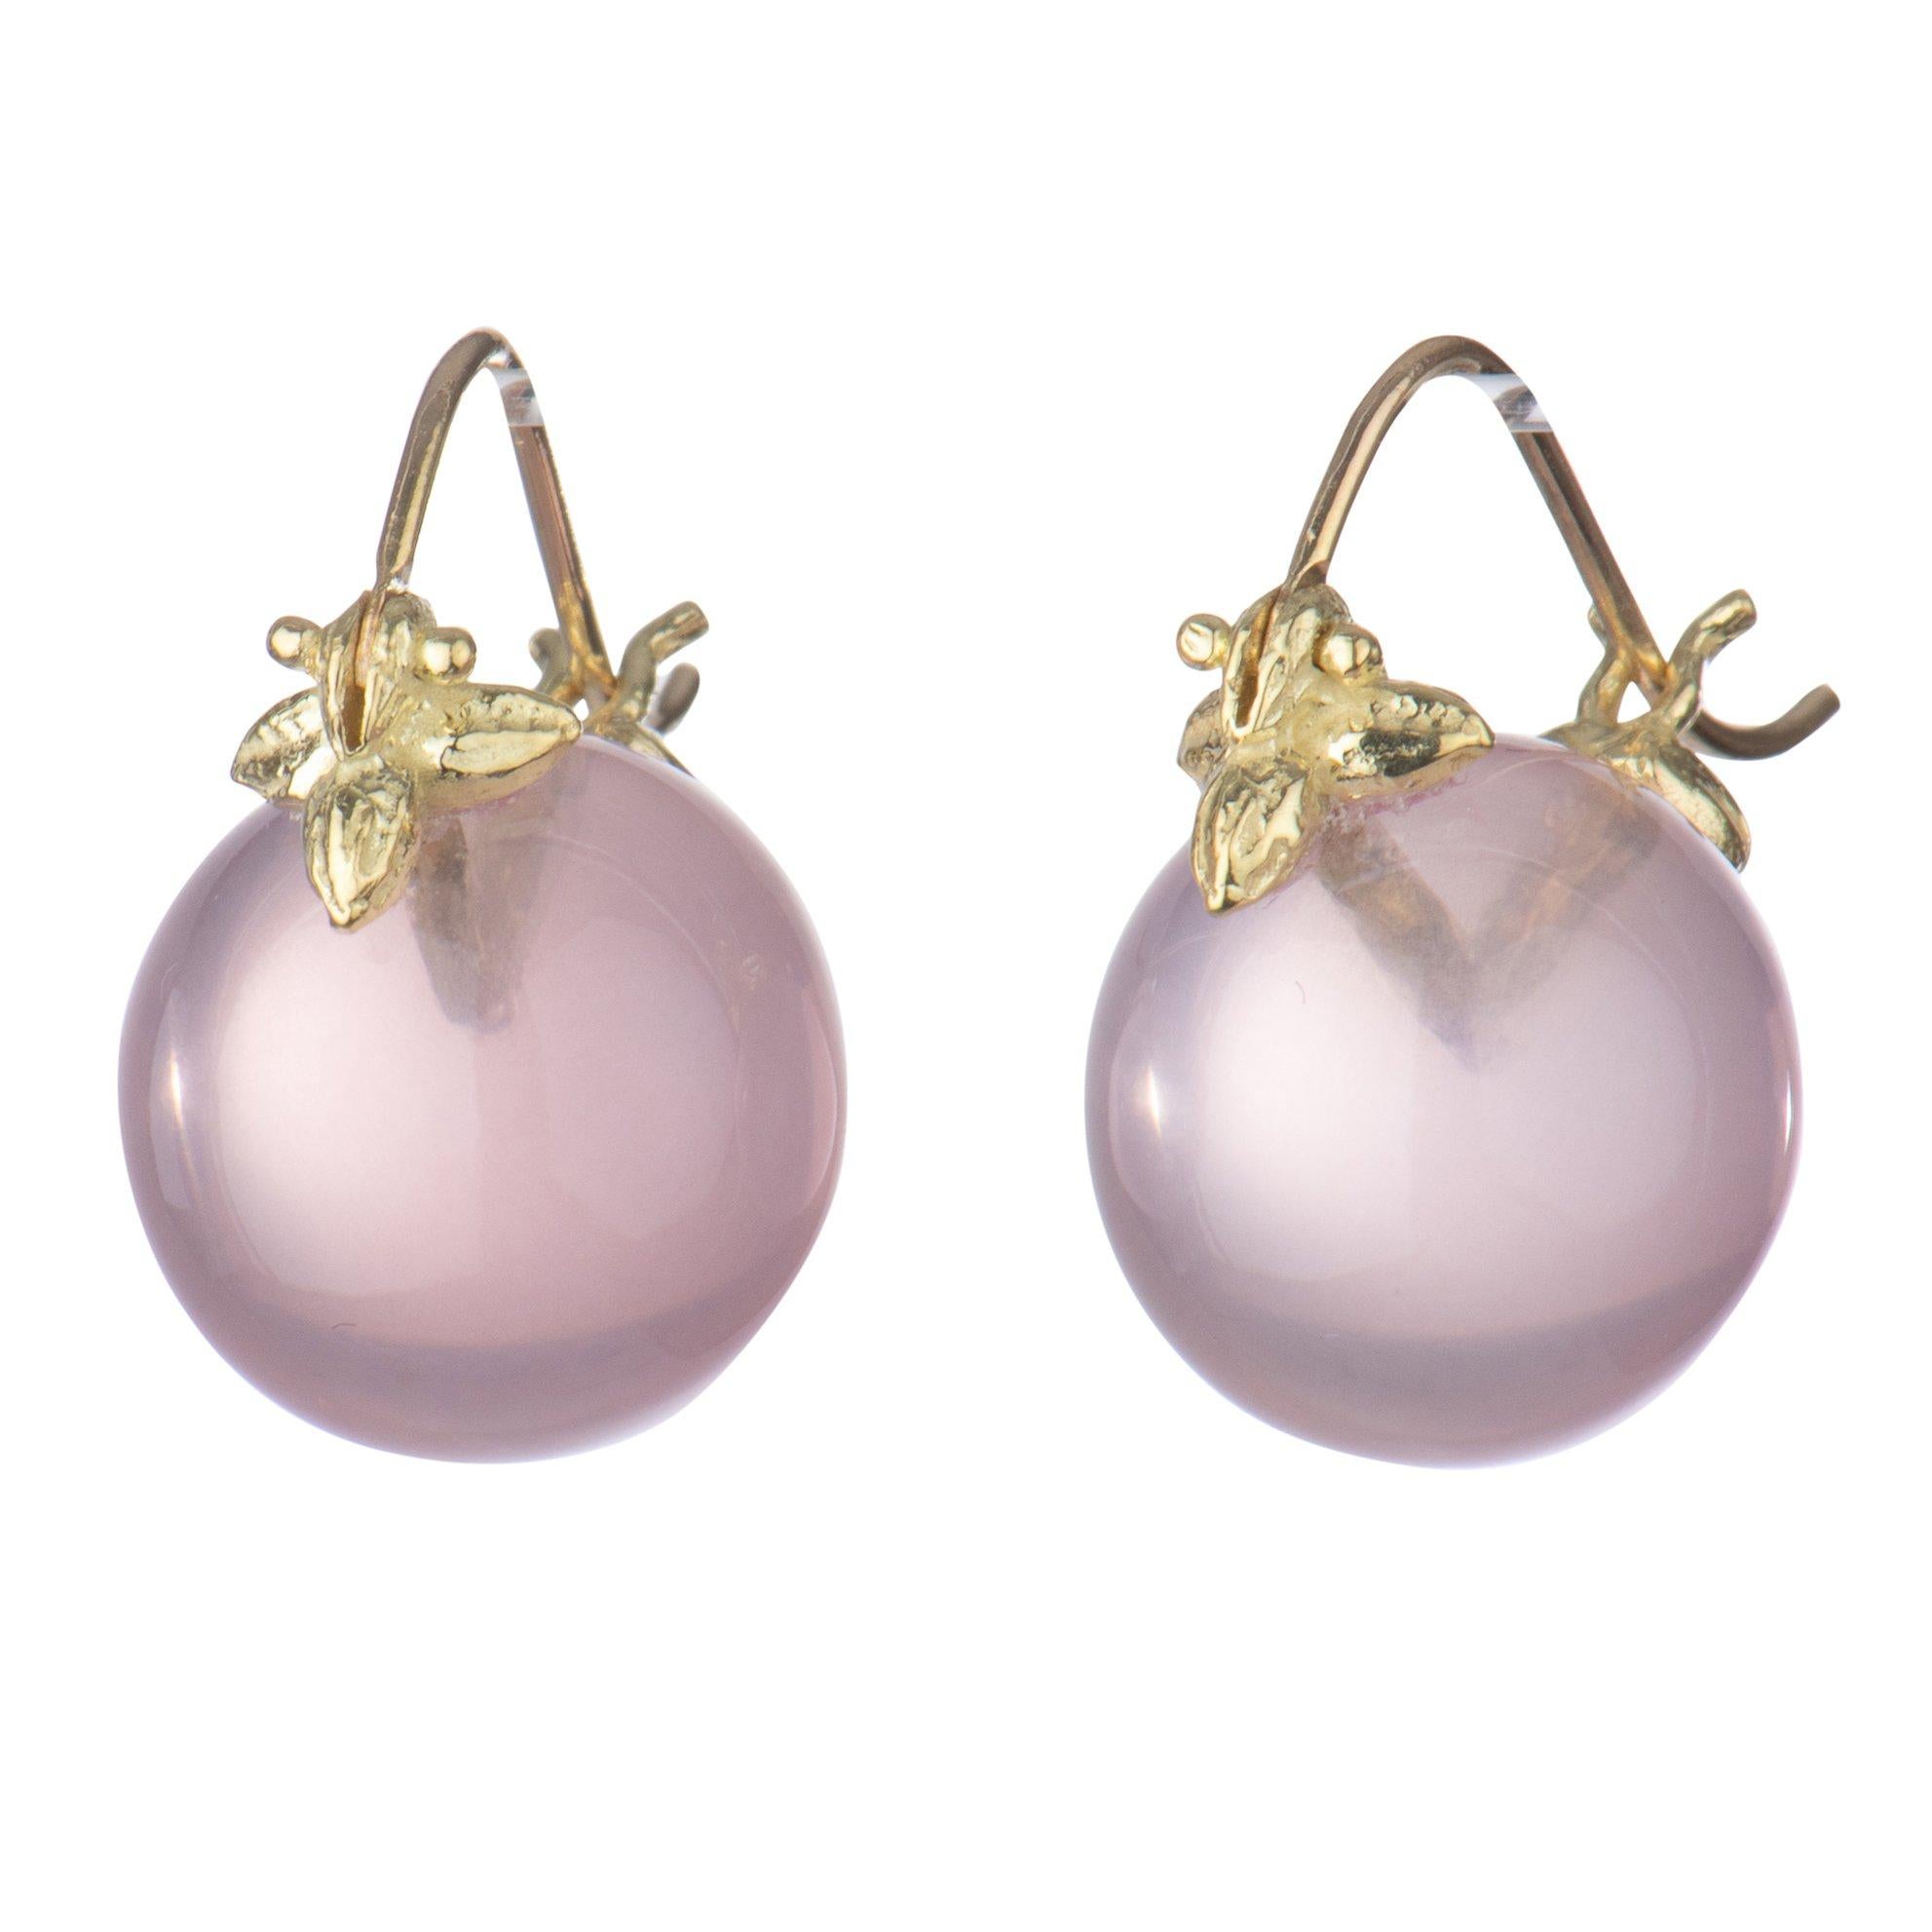 Sweet pink rose quartz manages to be both innocent and sophisticated in these flawless orbs, which are set with Gabrielle's signature 18k seed flyers. These lovely rose earrings are a simple yet memorable way to profess love. Even if—no, make that